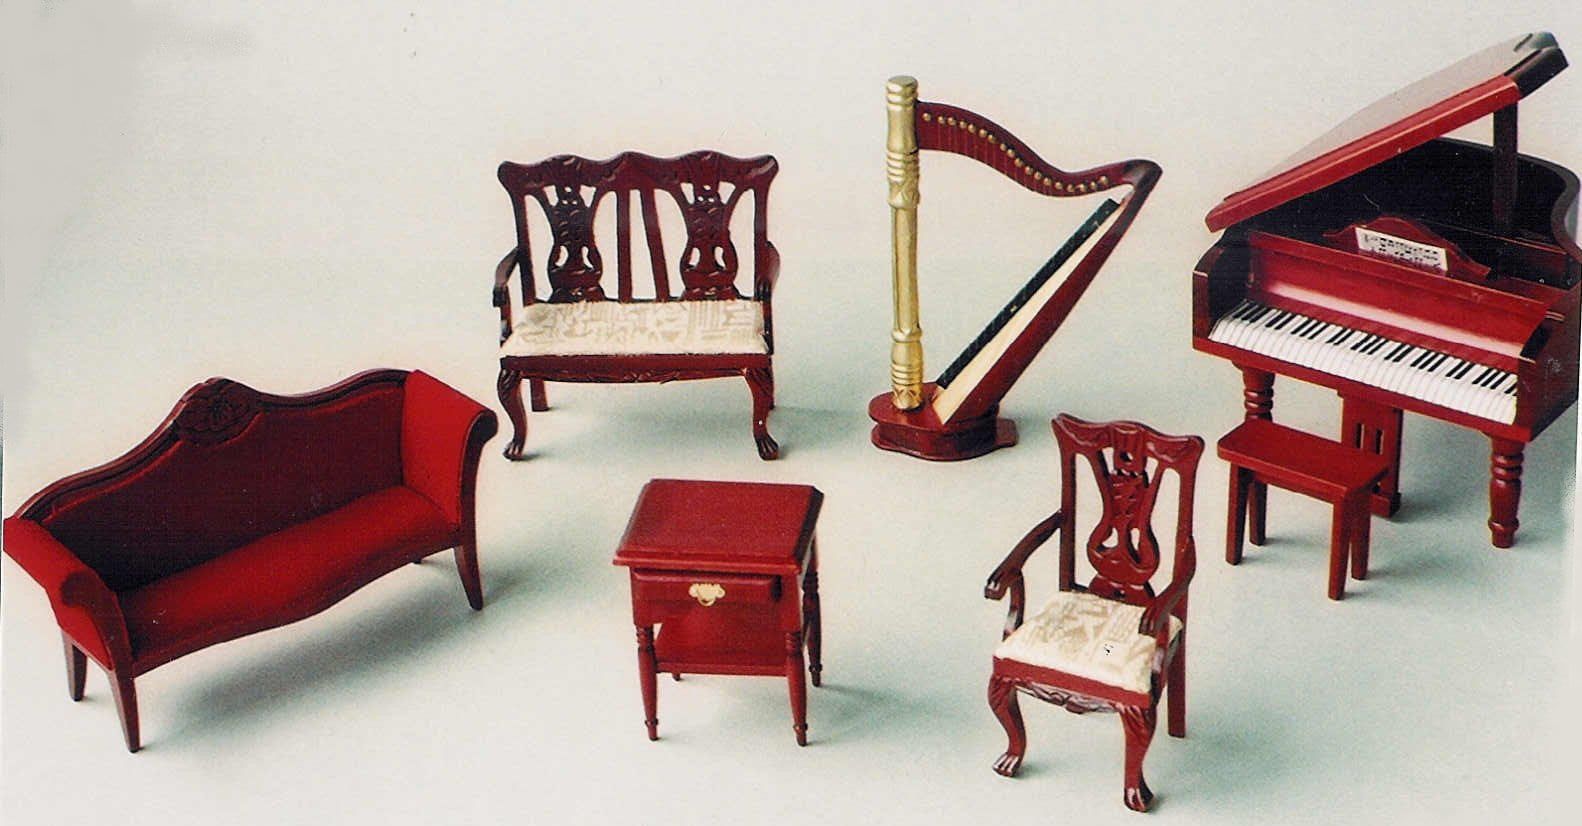 7 Piece Music Room Set for 12th Scale Dolls House